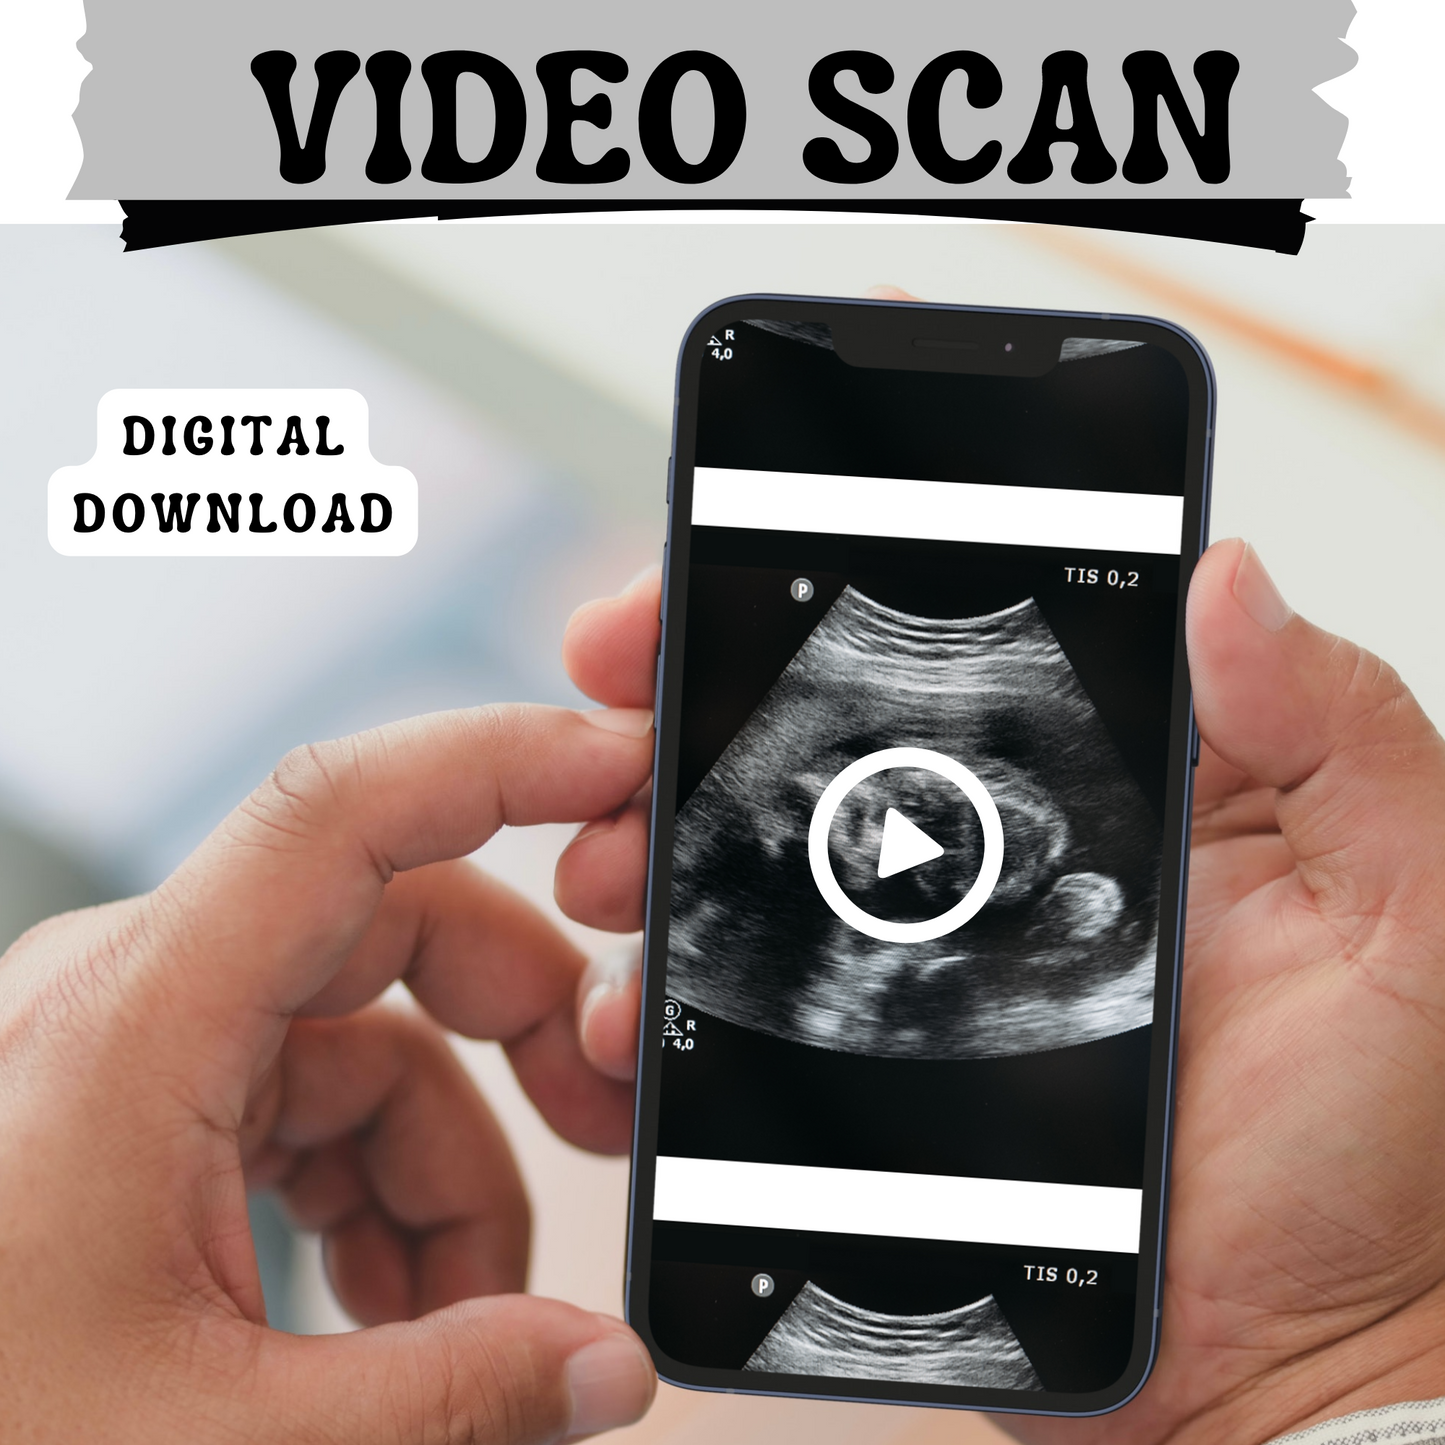 Customized Digital Ultrasound Video!! Instant Download!